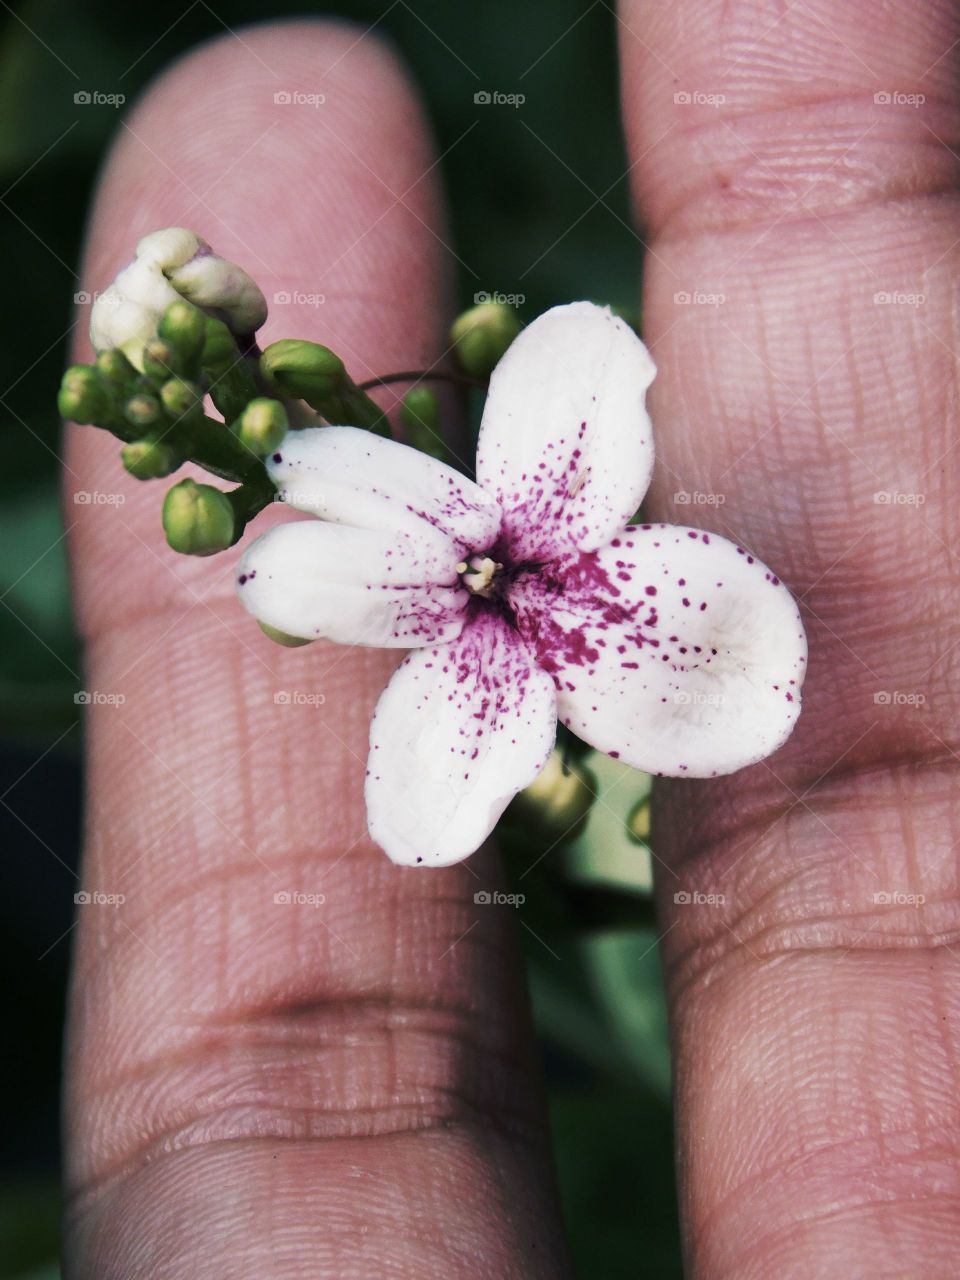 View of small flower in hand